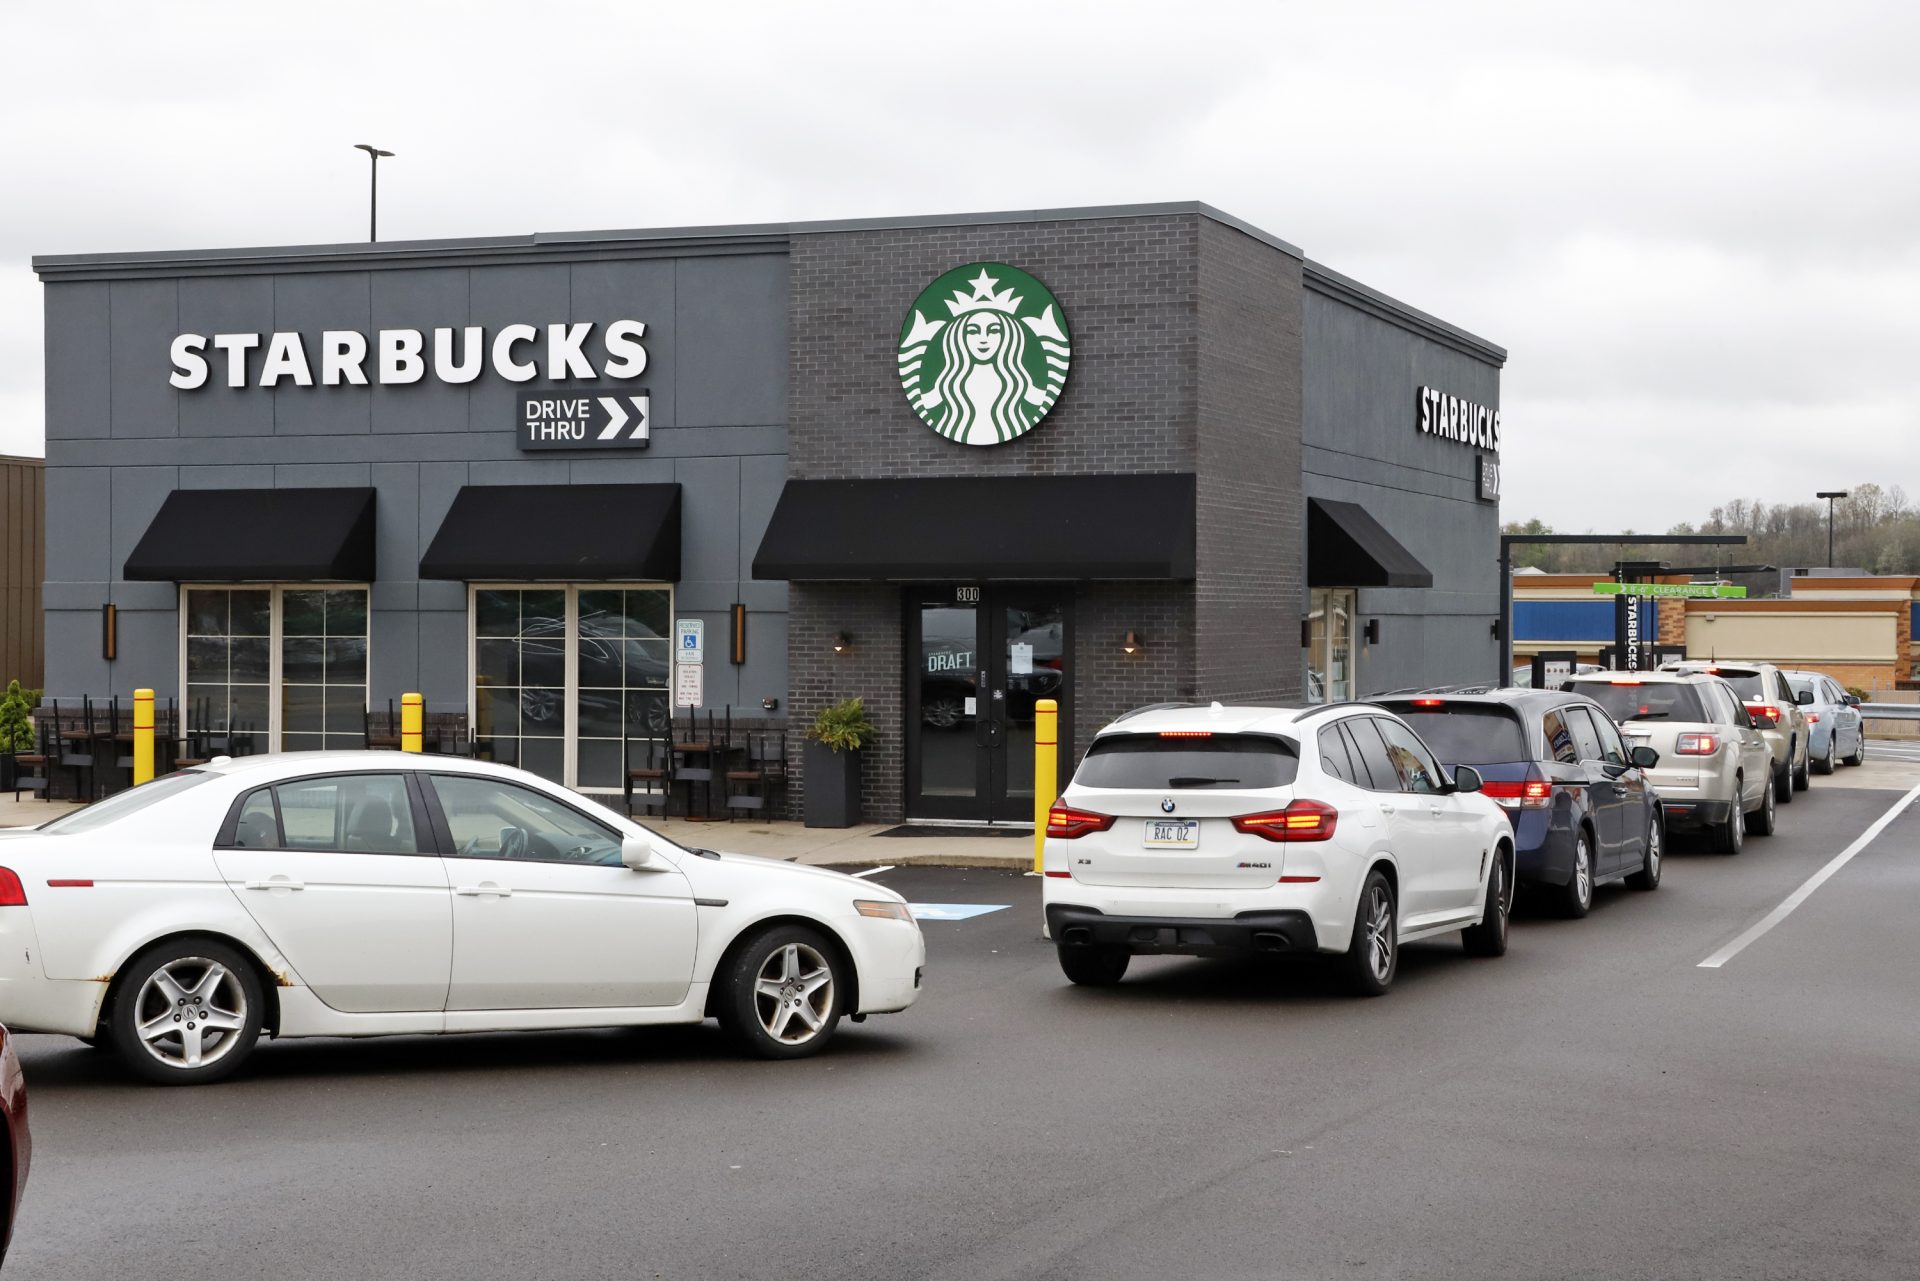 Cars line up in the drive-thru of a Starbucks in Robinson Township, Pa., Wednesday, May 6, 2020.